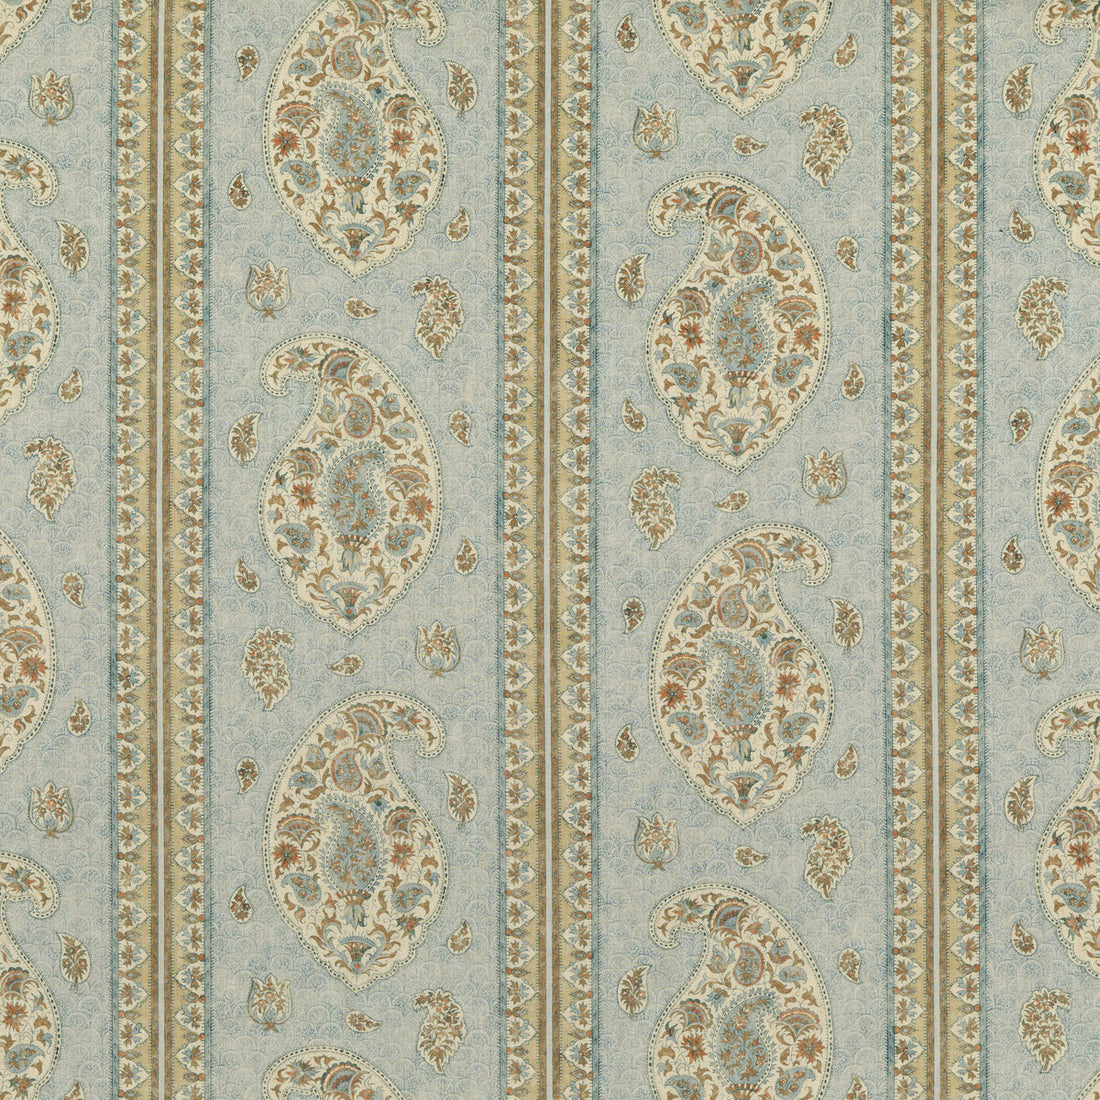 Coromandel fabric in blue/sand color - pattern BP10831.4.0 - by G P &amp; J Baker in the Coromandel collection